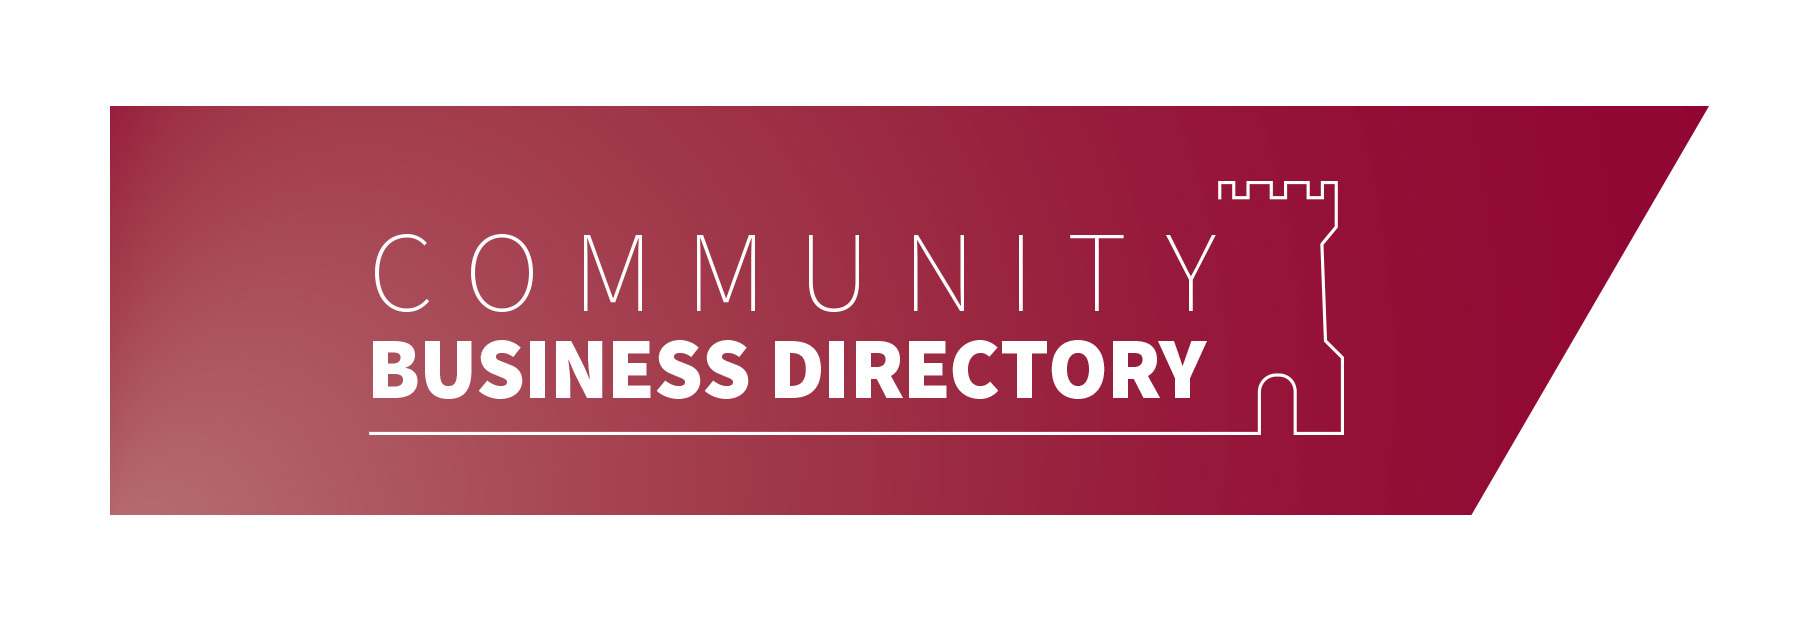 Macleans college community business directory